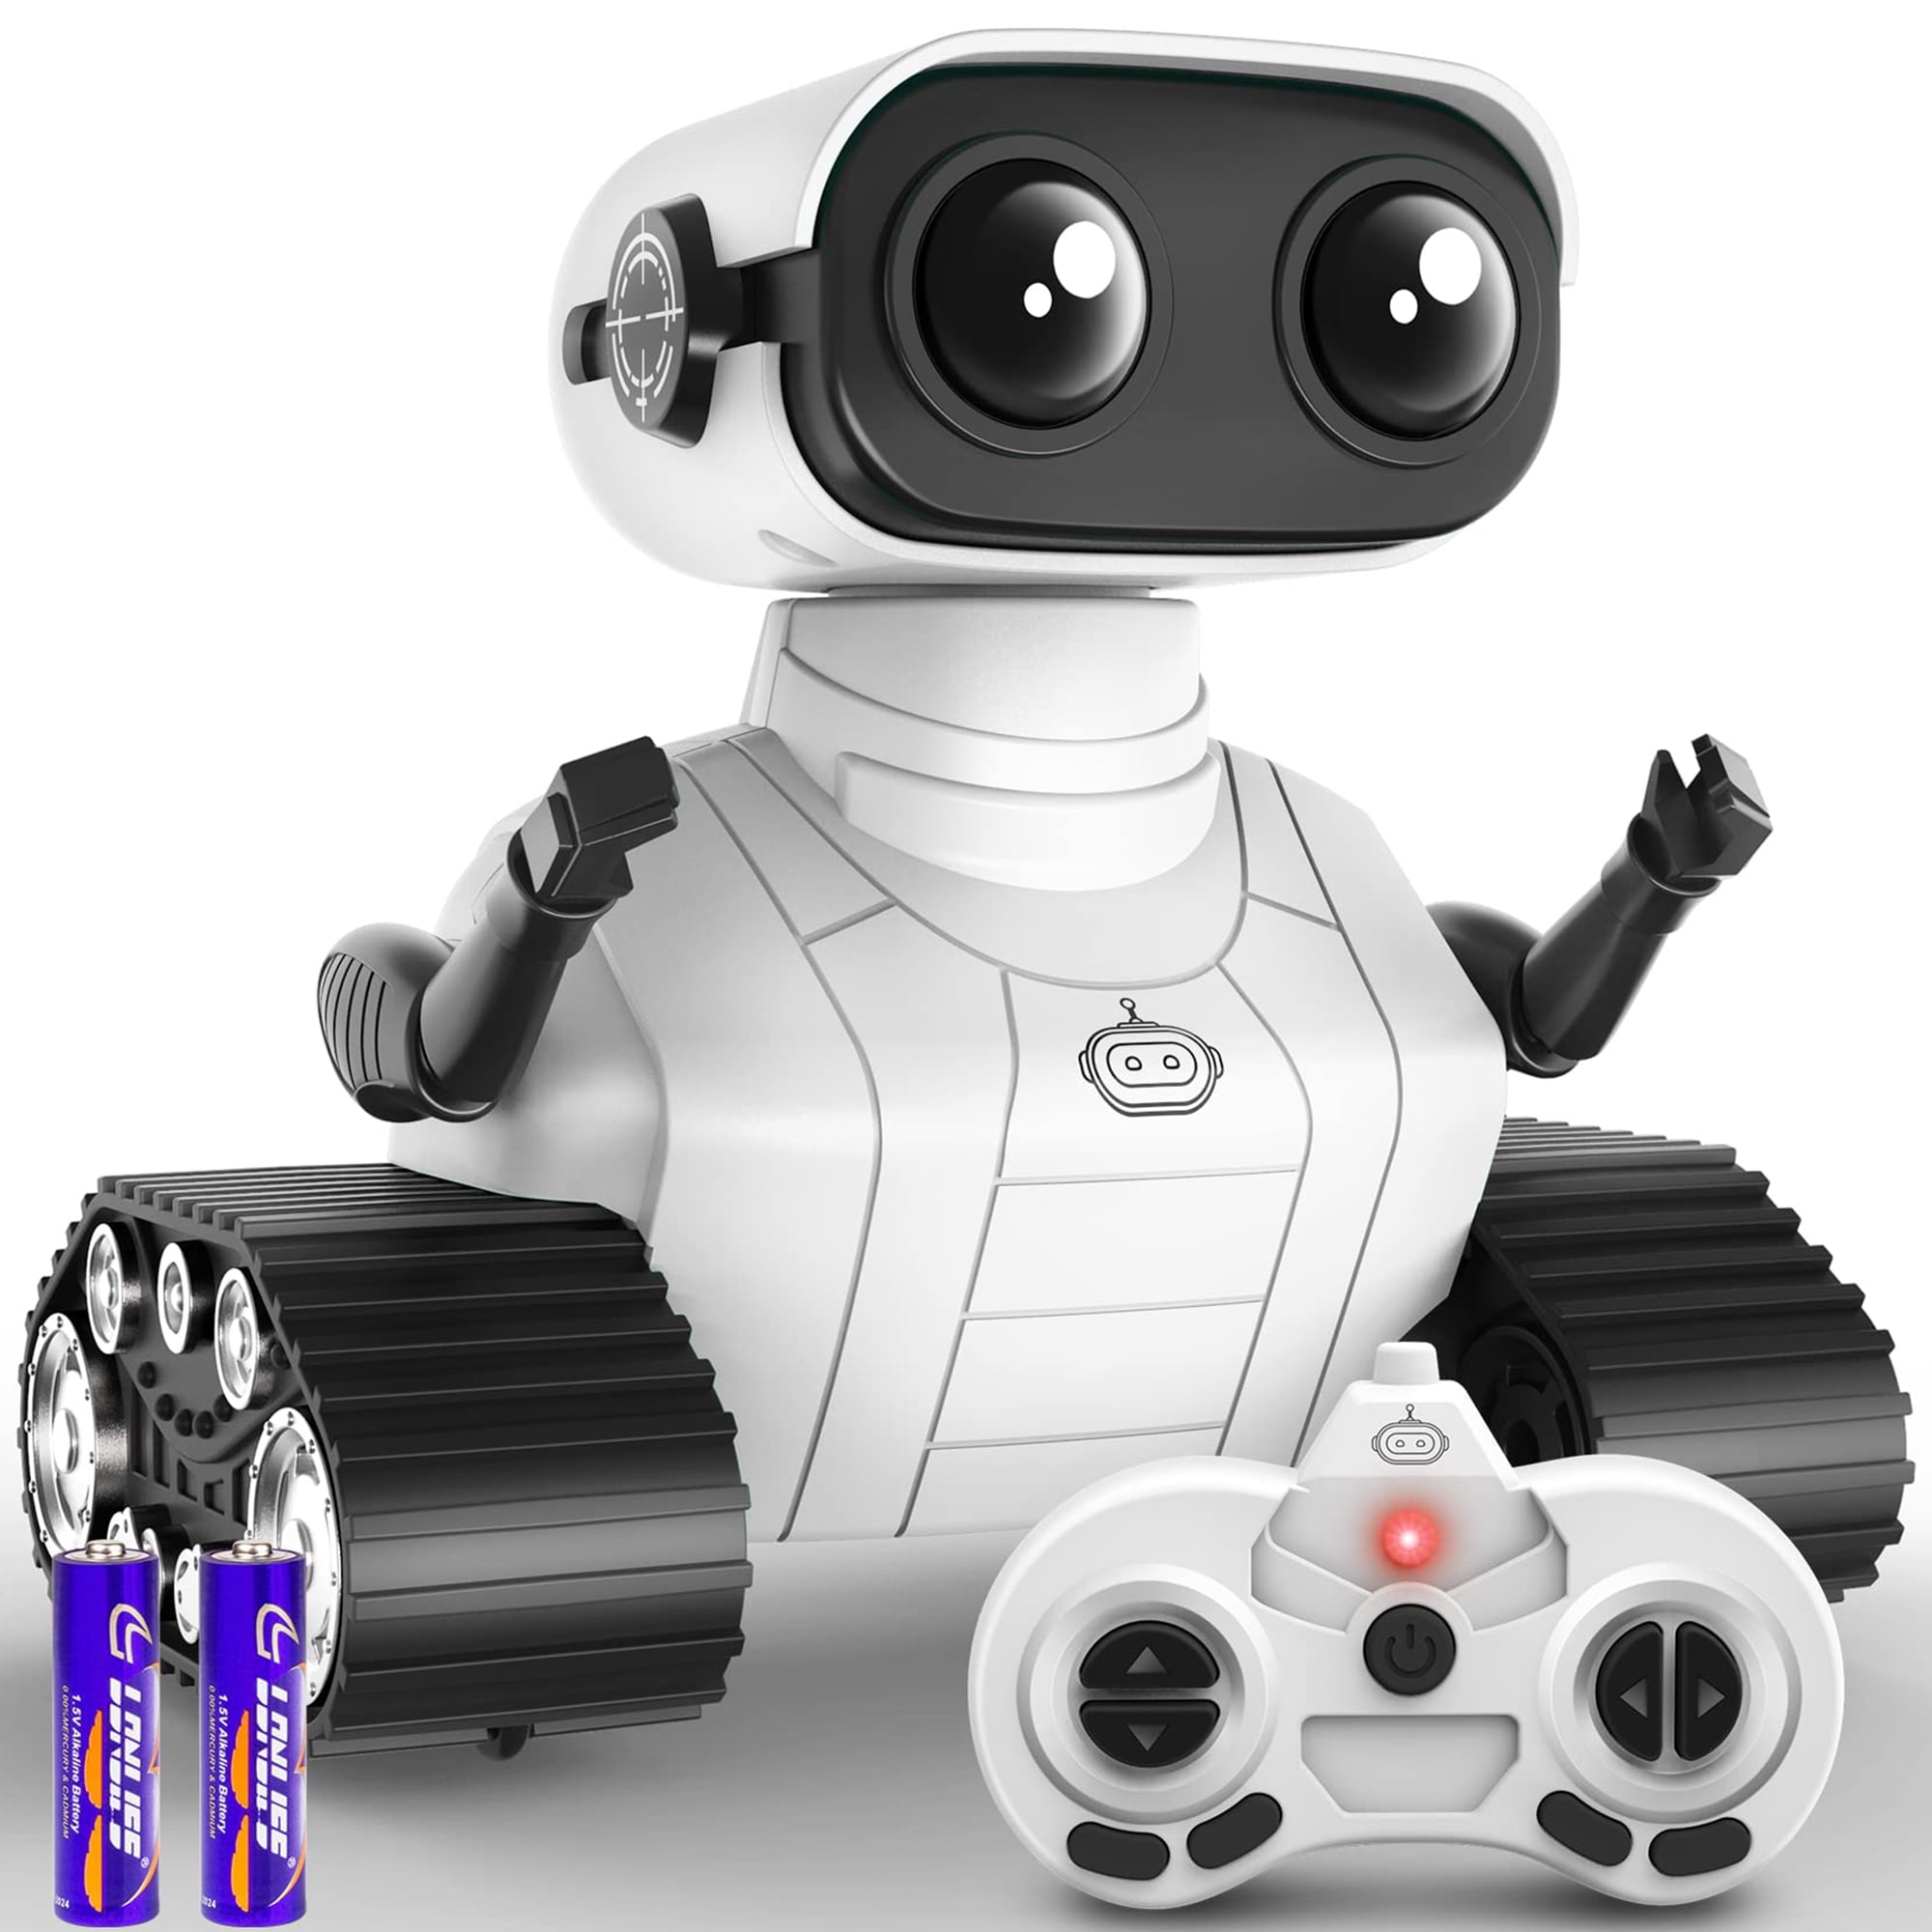  Niho Tech Smart Remote Control Emo Robot Toys for Kids 5-7 Year  Old, Emo Robots Gifts for Boys 6-8 Birthday Gift Toy Hand Gesture RC  Sensing programmable Robotics : Toys & Games